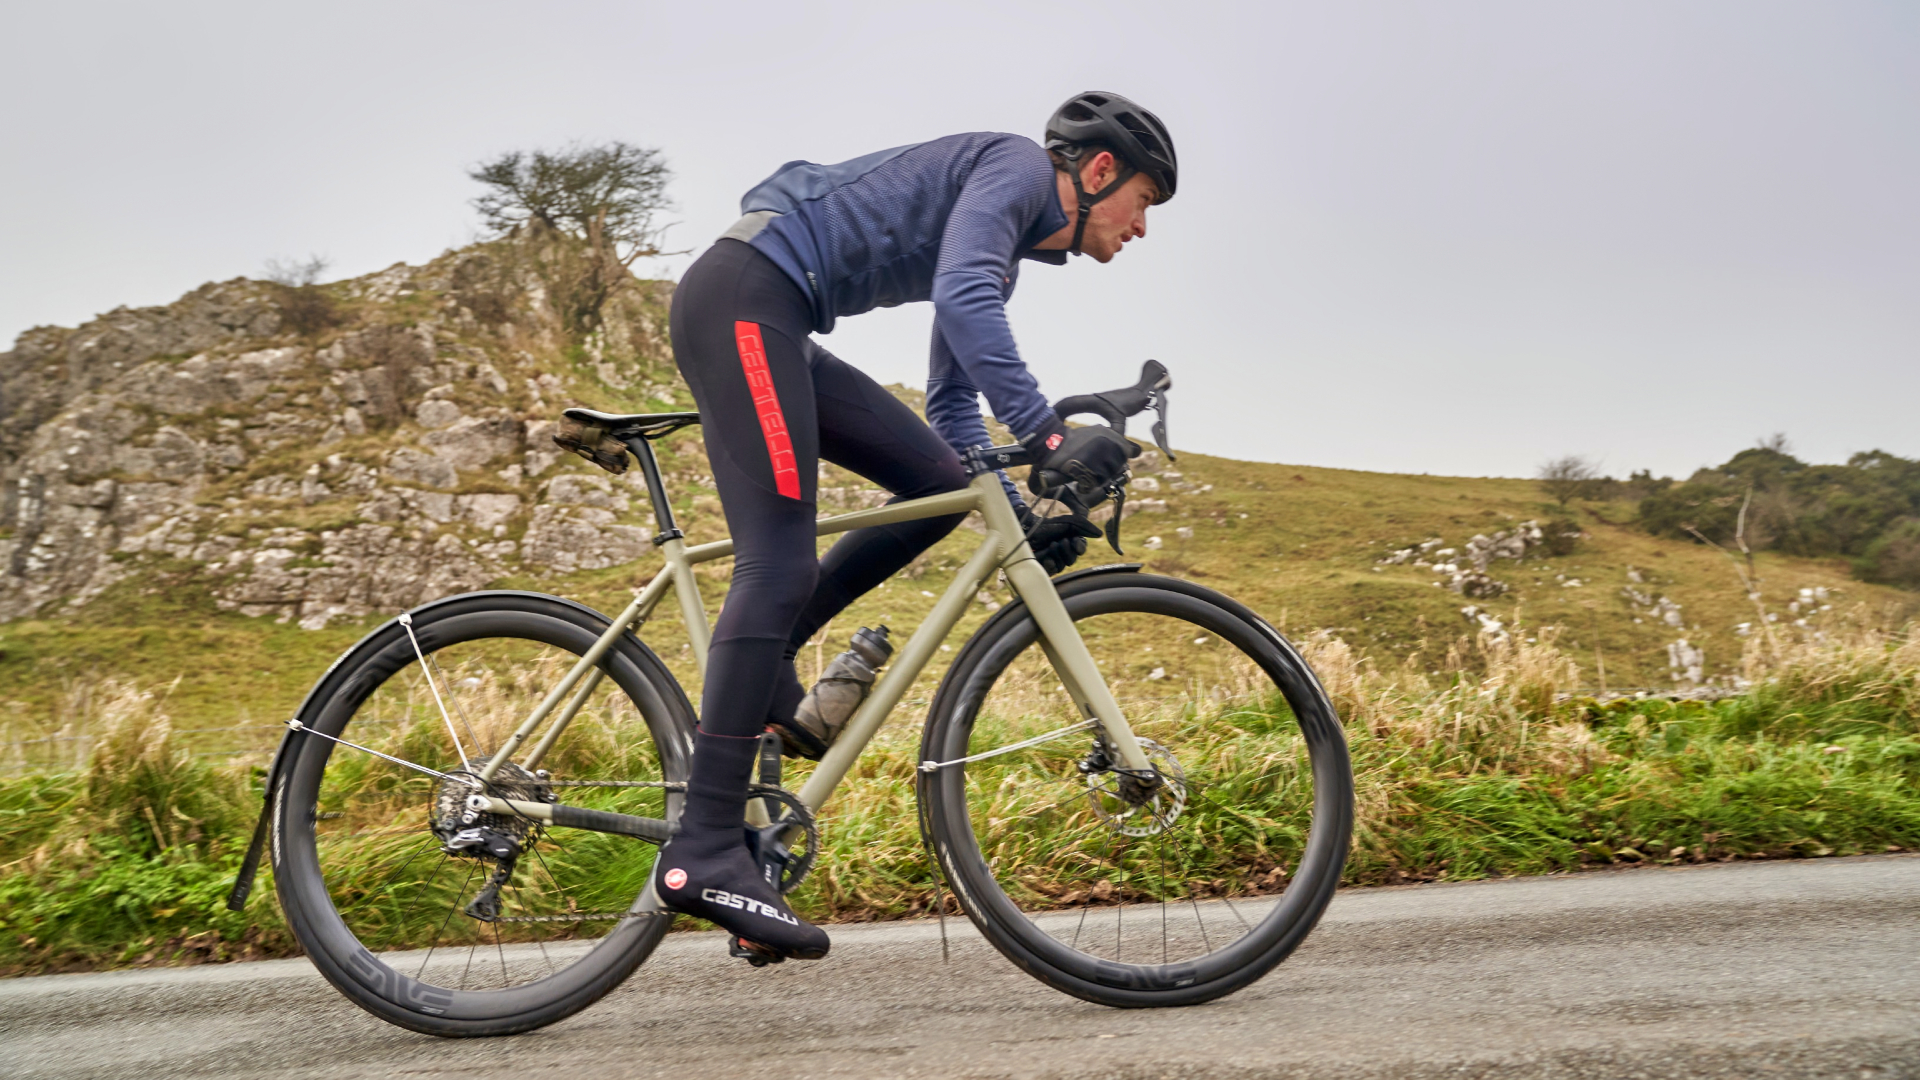 Best Mudguards: Buying Guide To Protect The Rear